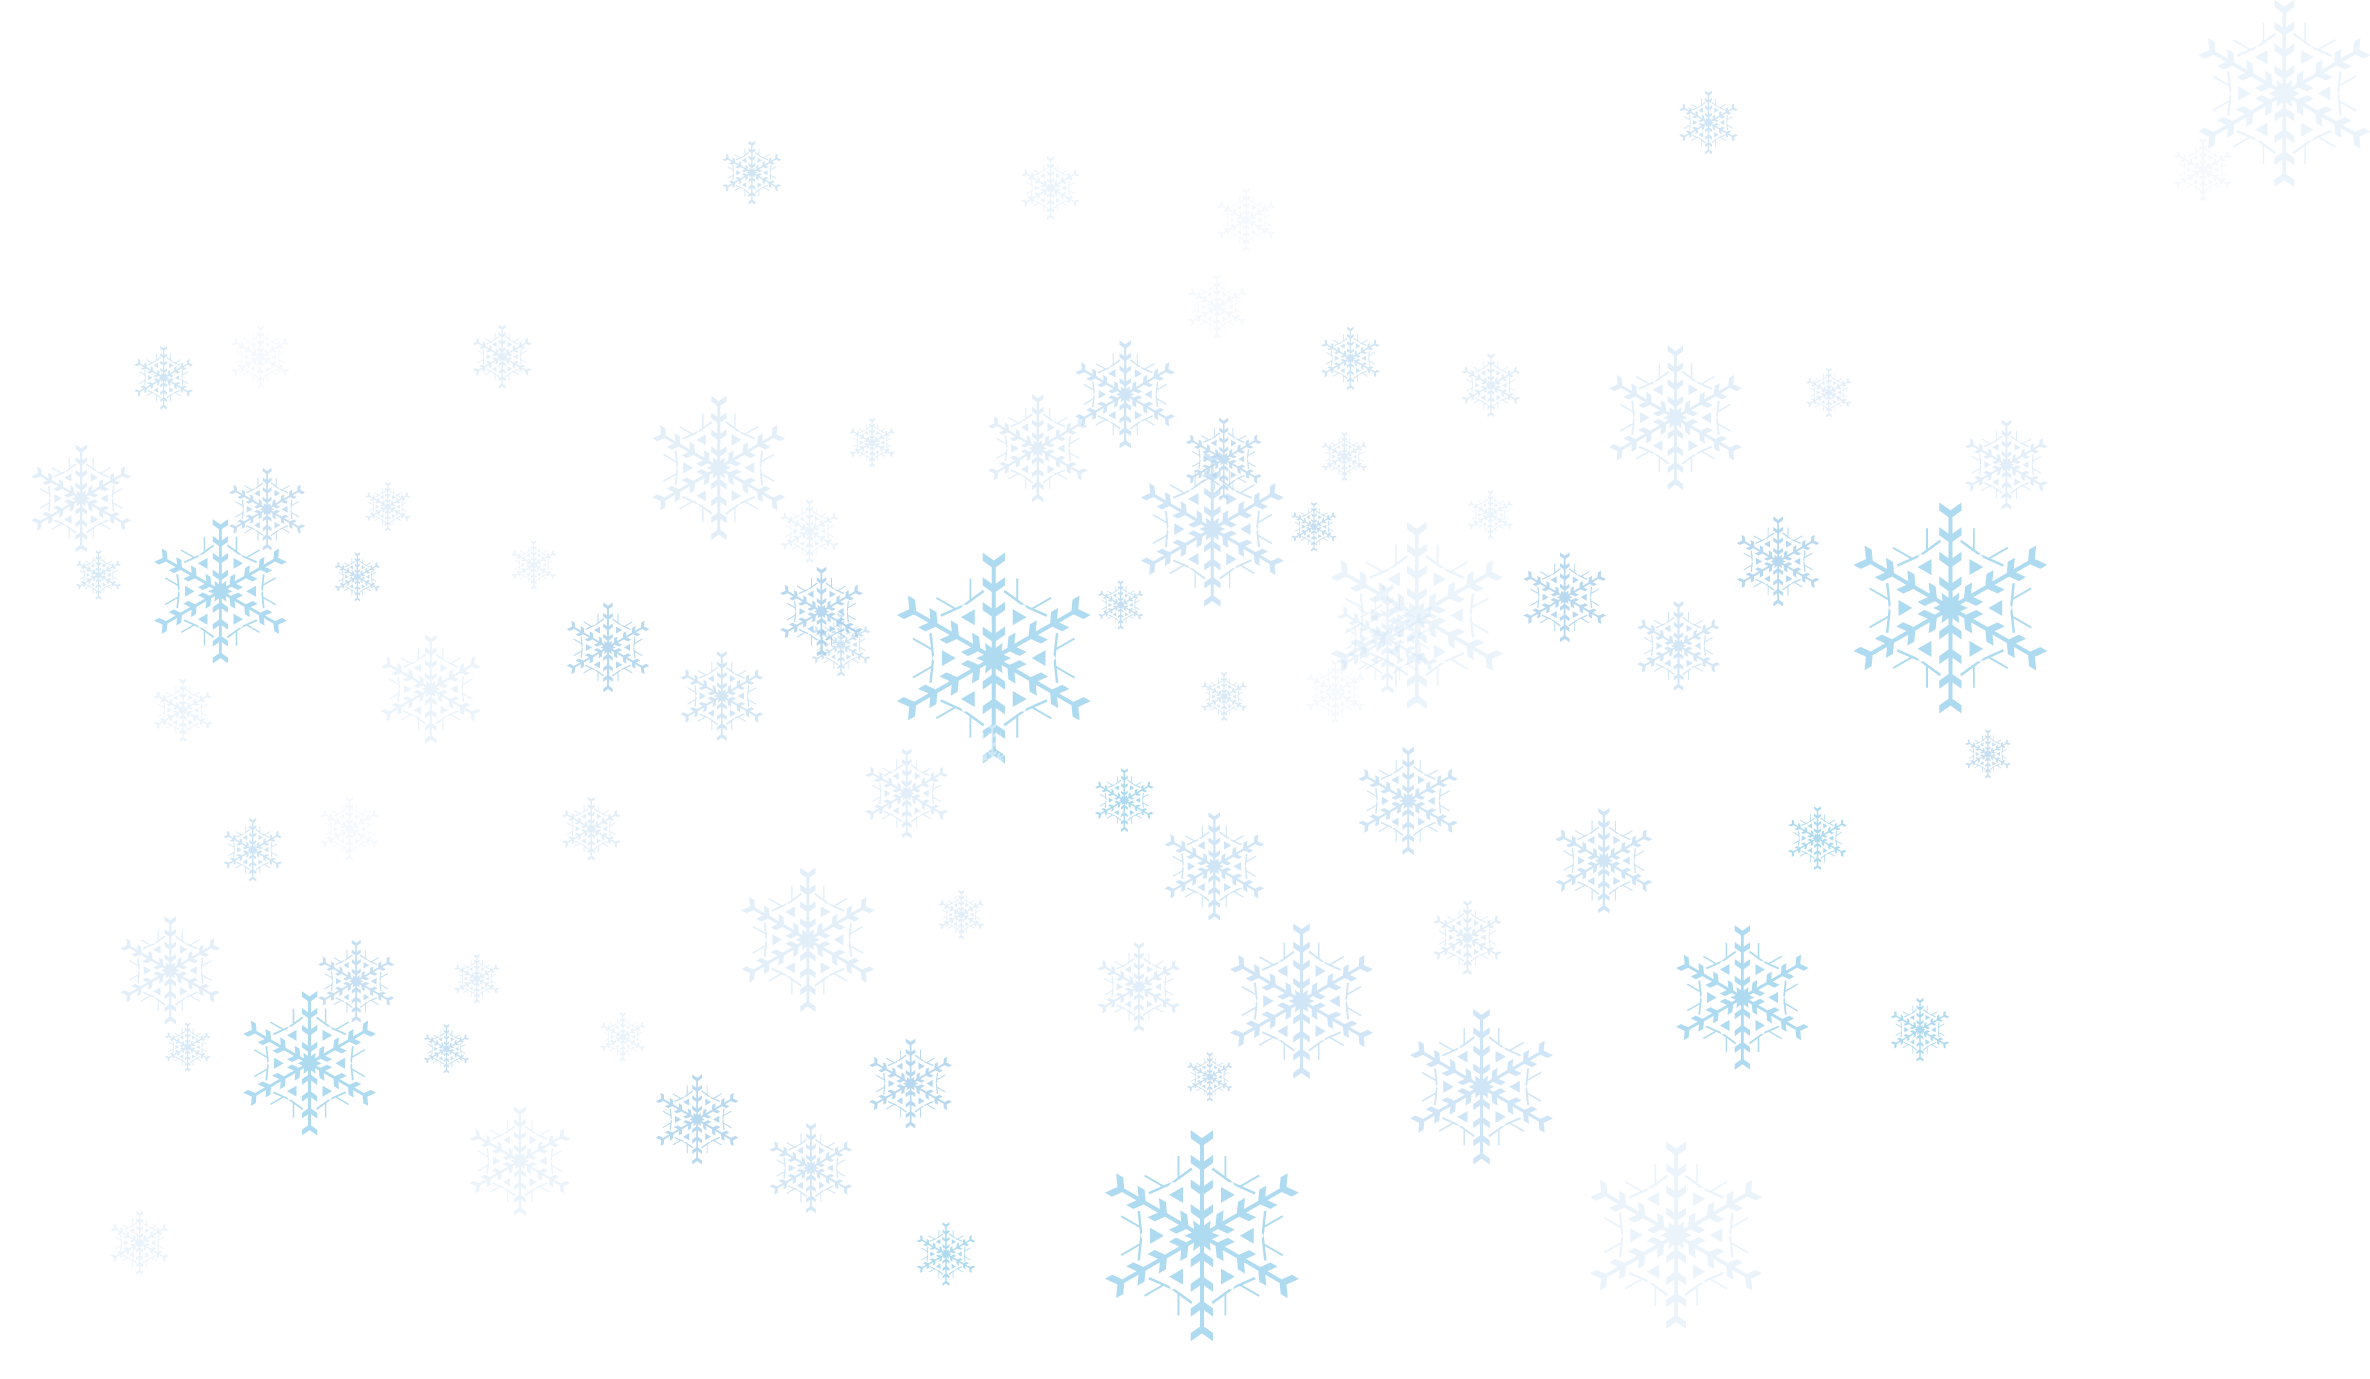 4. "White and Silver Snowflakes" - wide 5